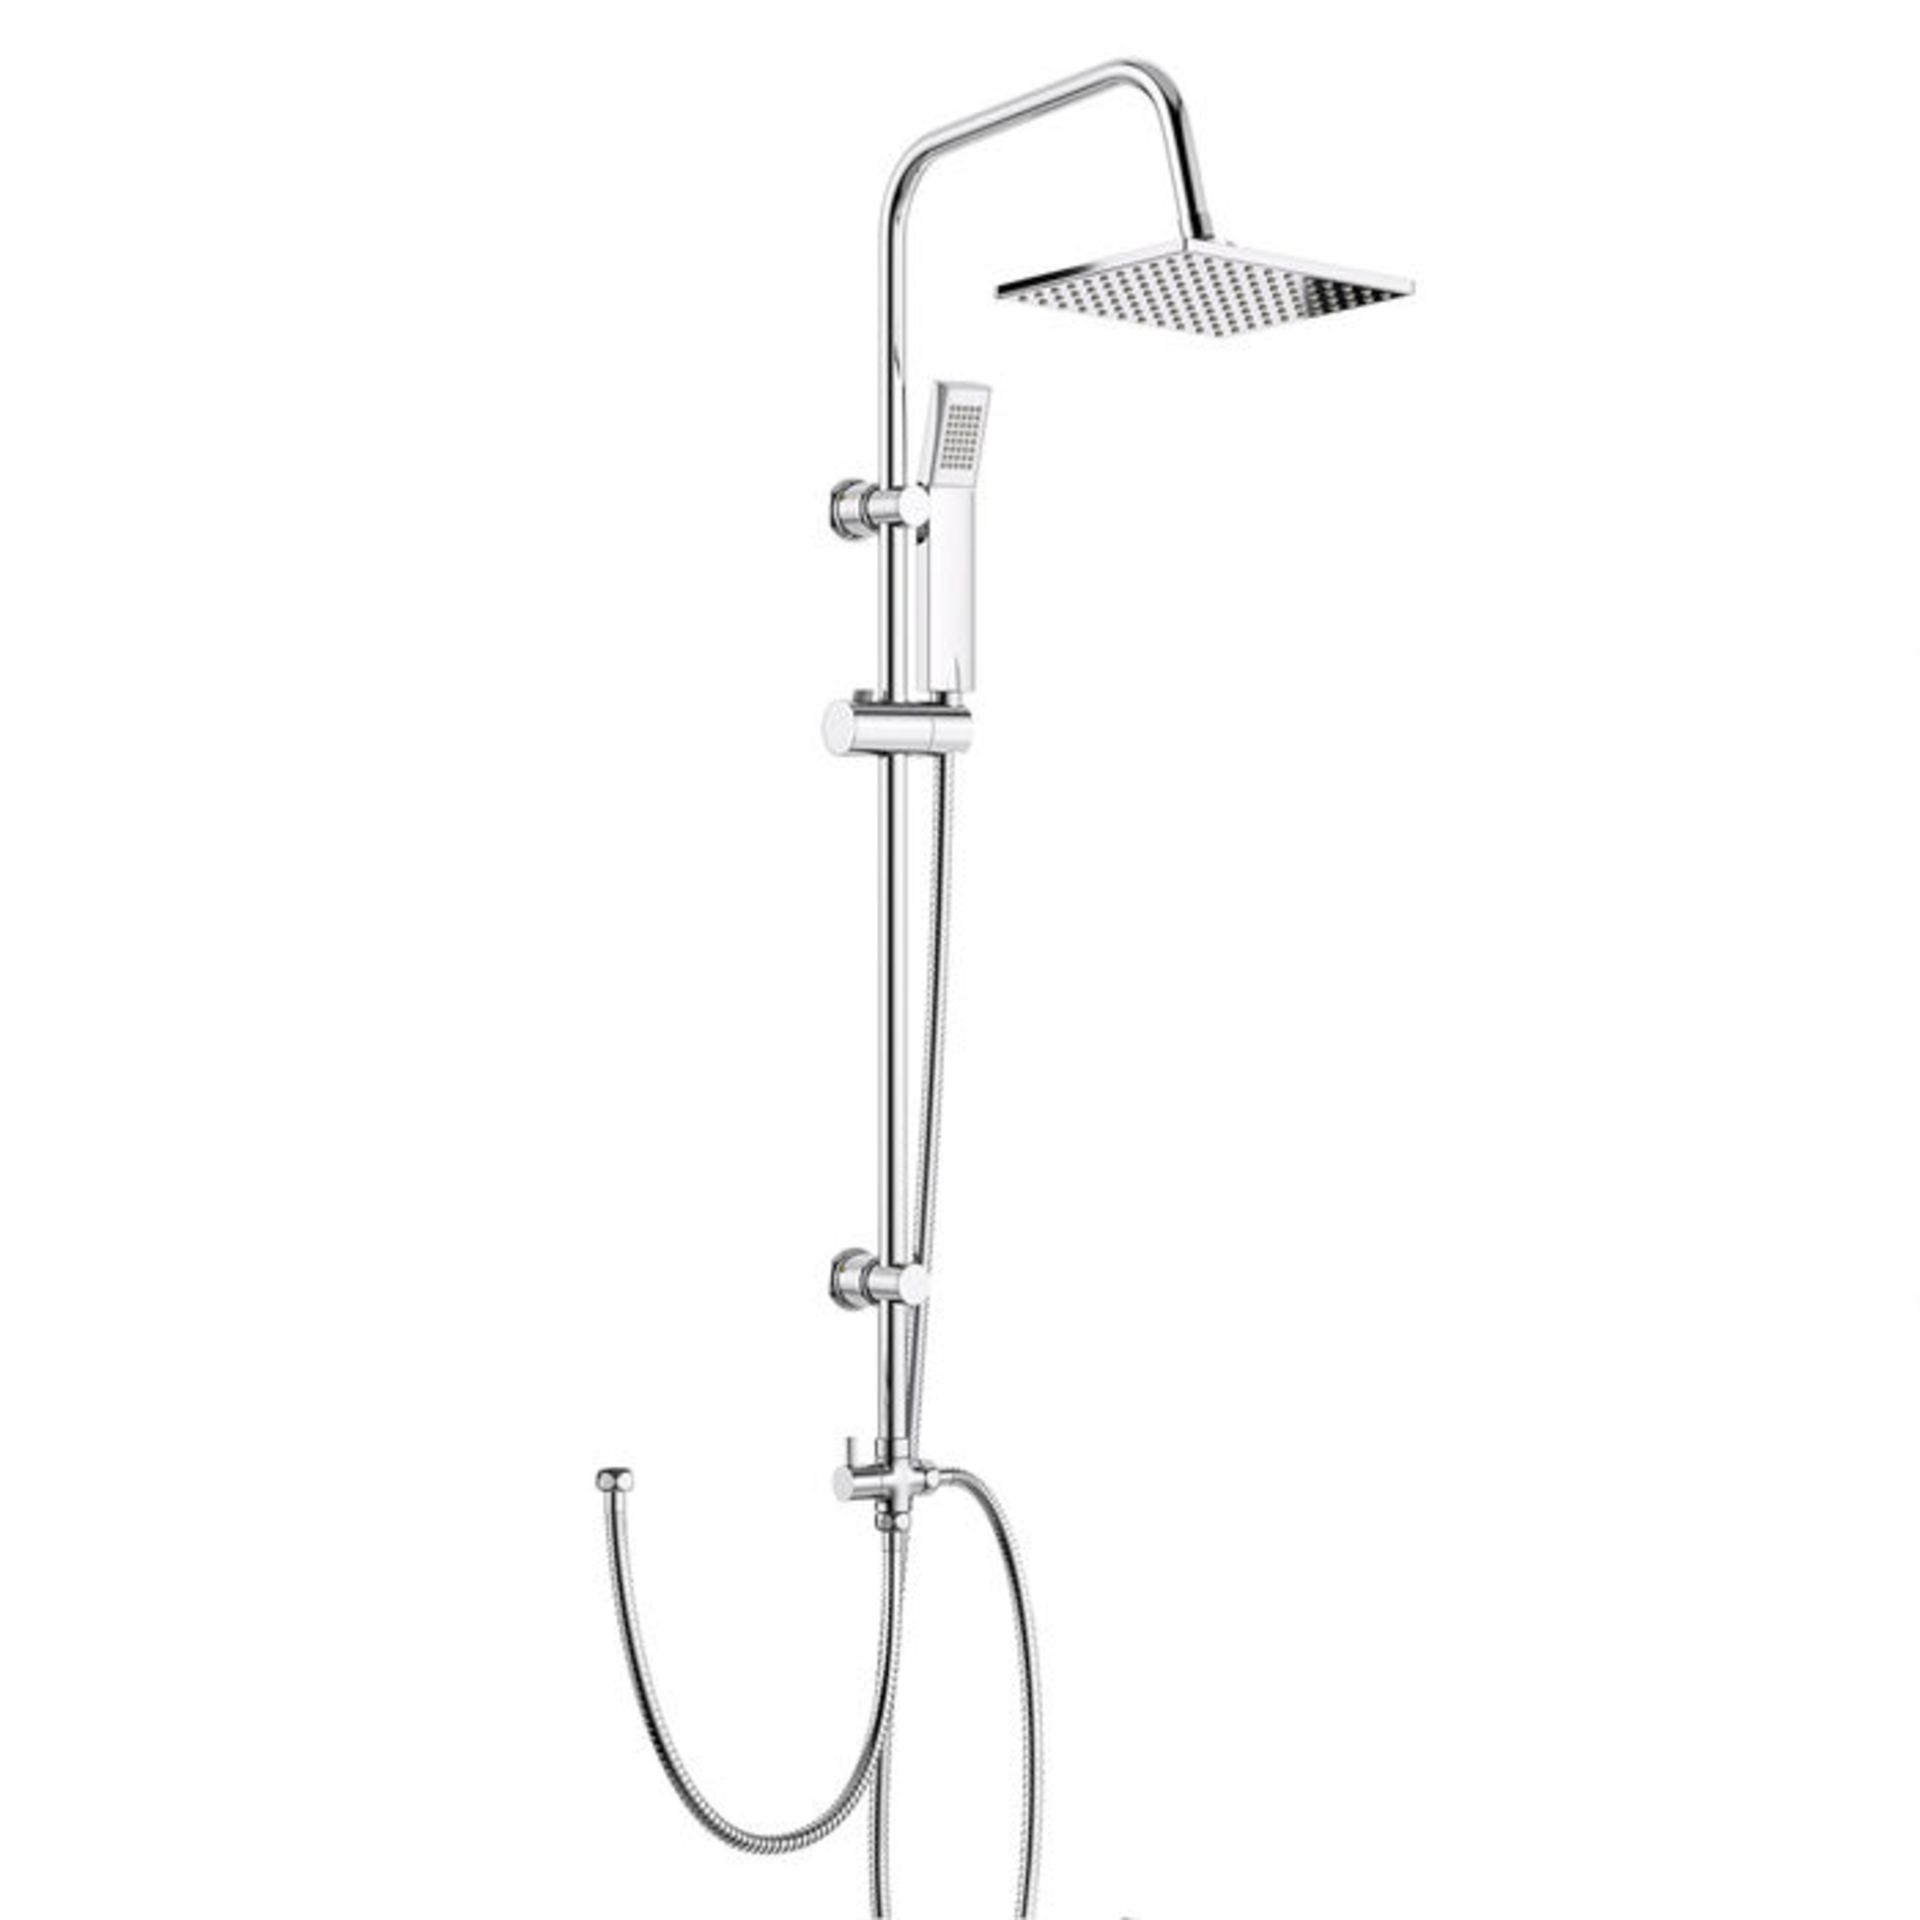 200mm Square Head, Riser Rail & Handheld Kit. Quality stainless steel shower head with Easy C... - Image 2 of 4